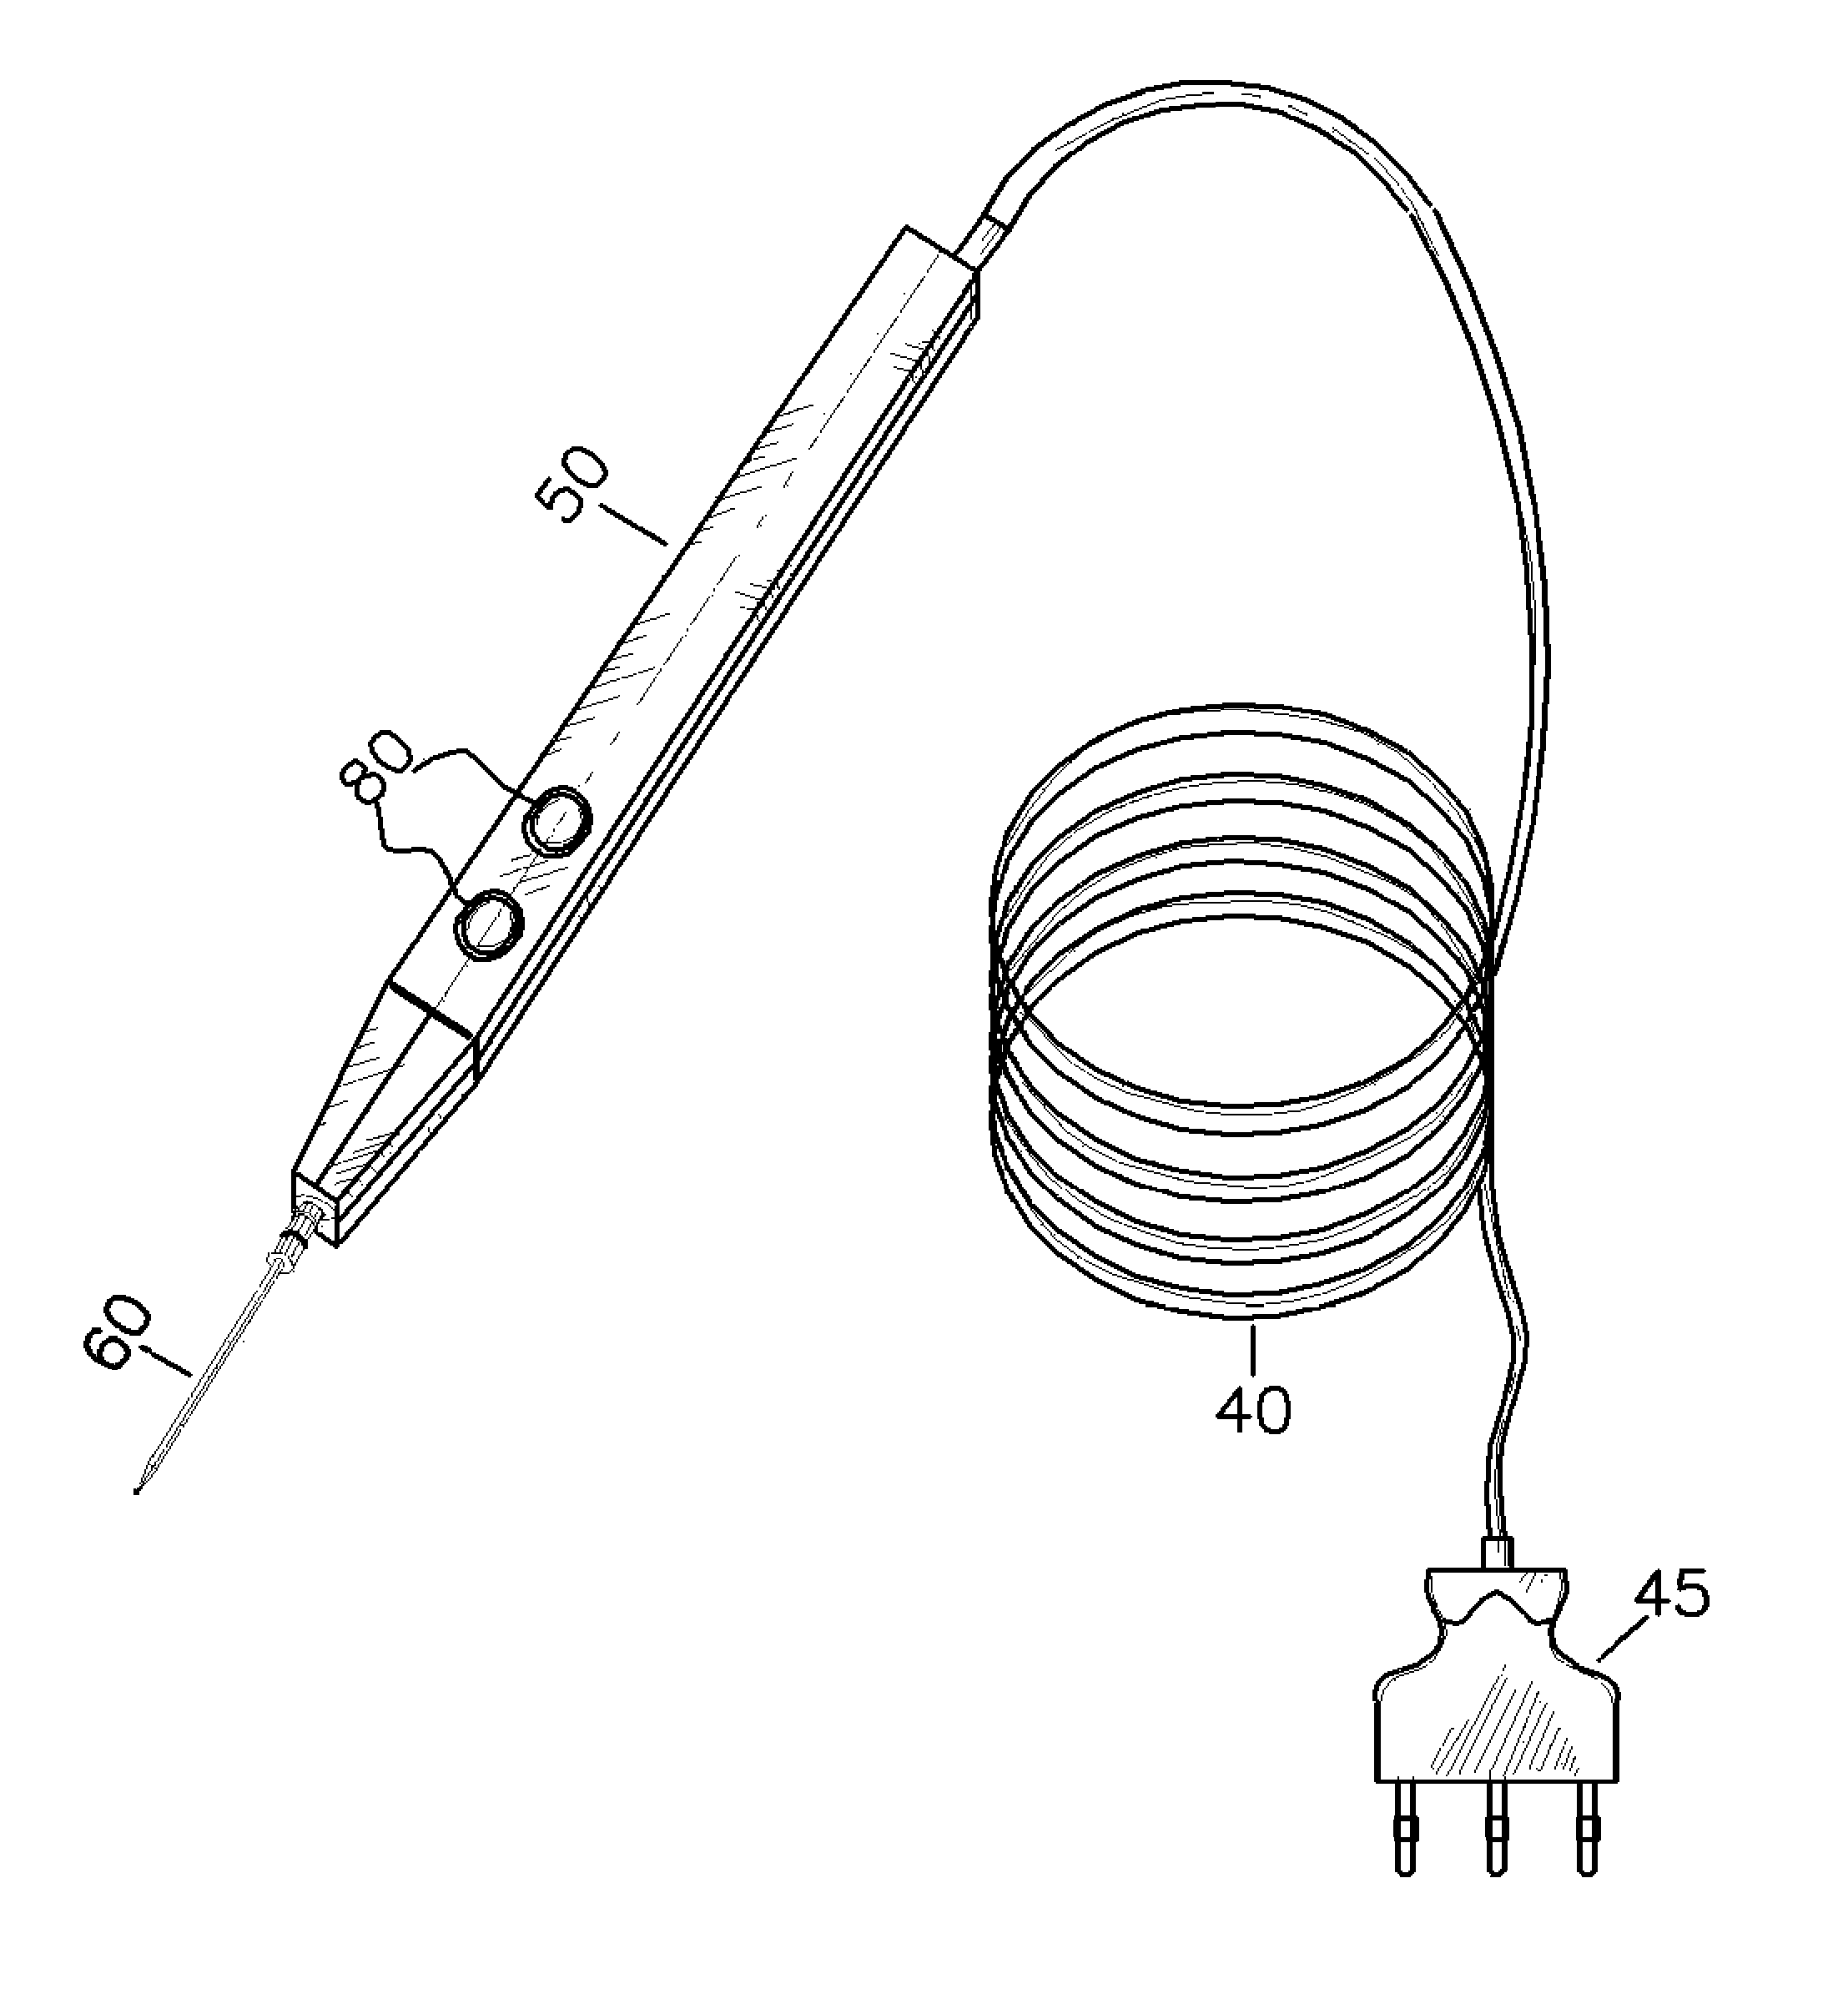 Medical heating device and method with self-limiting electrical heating element